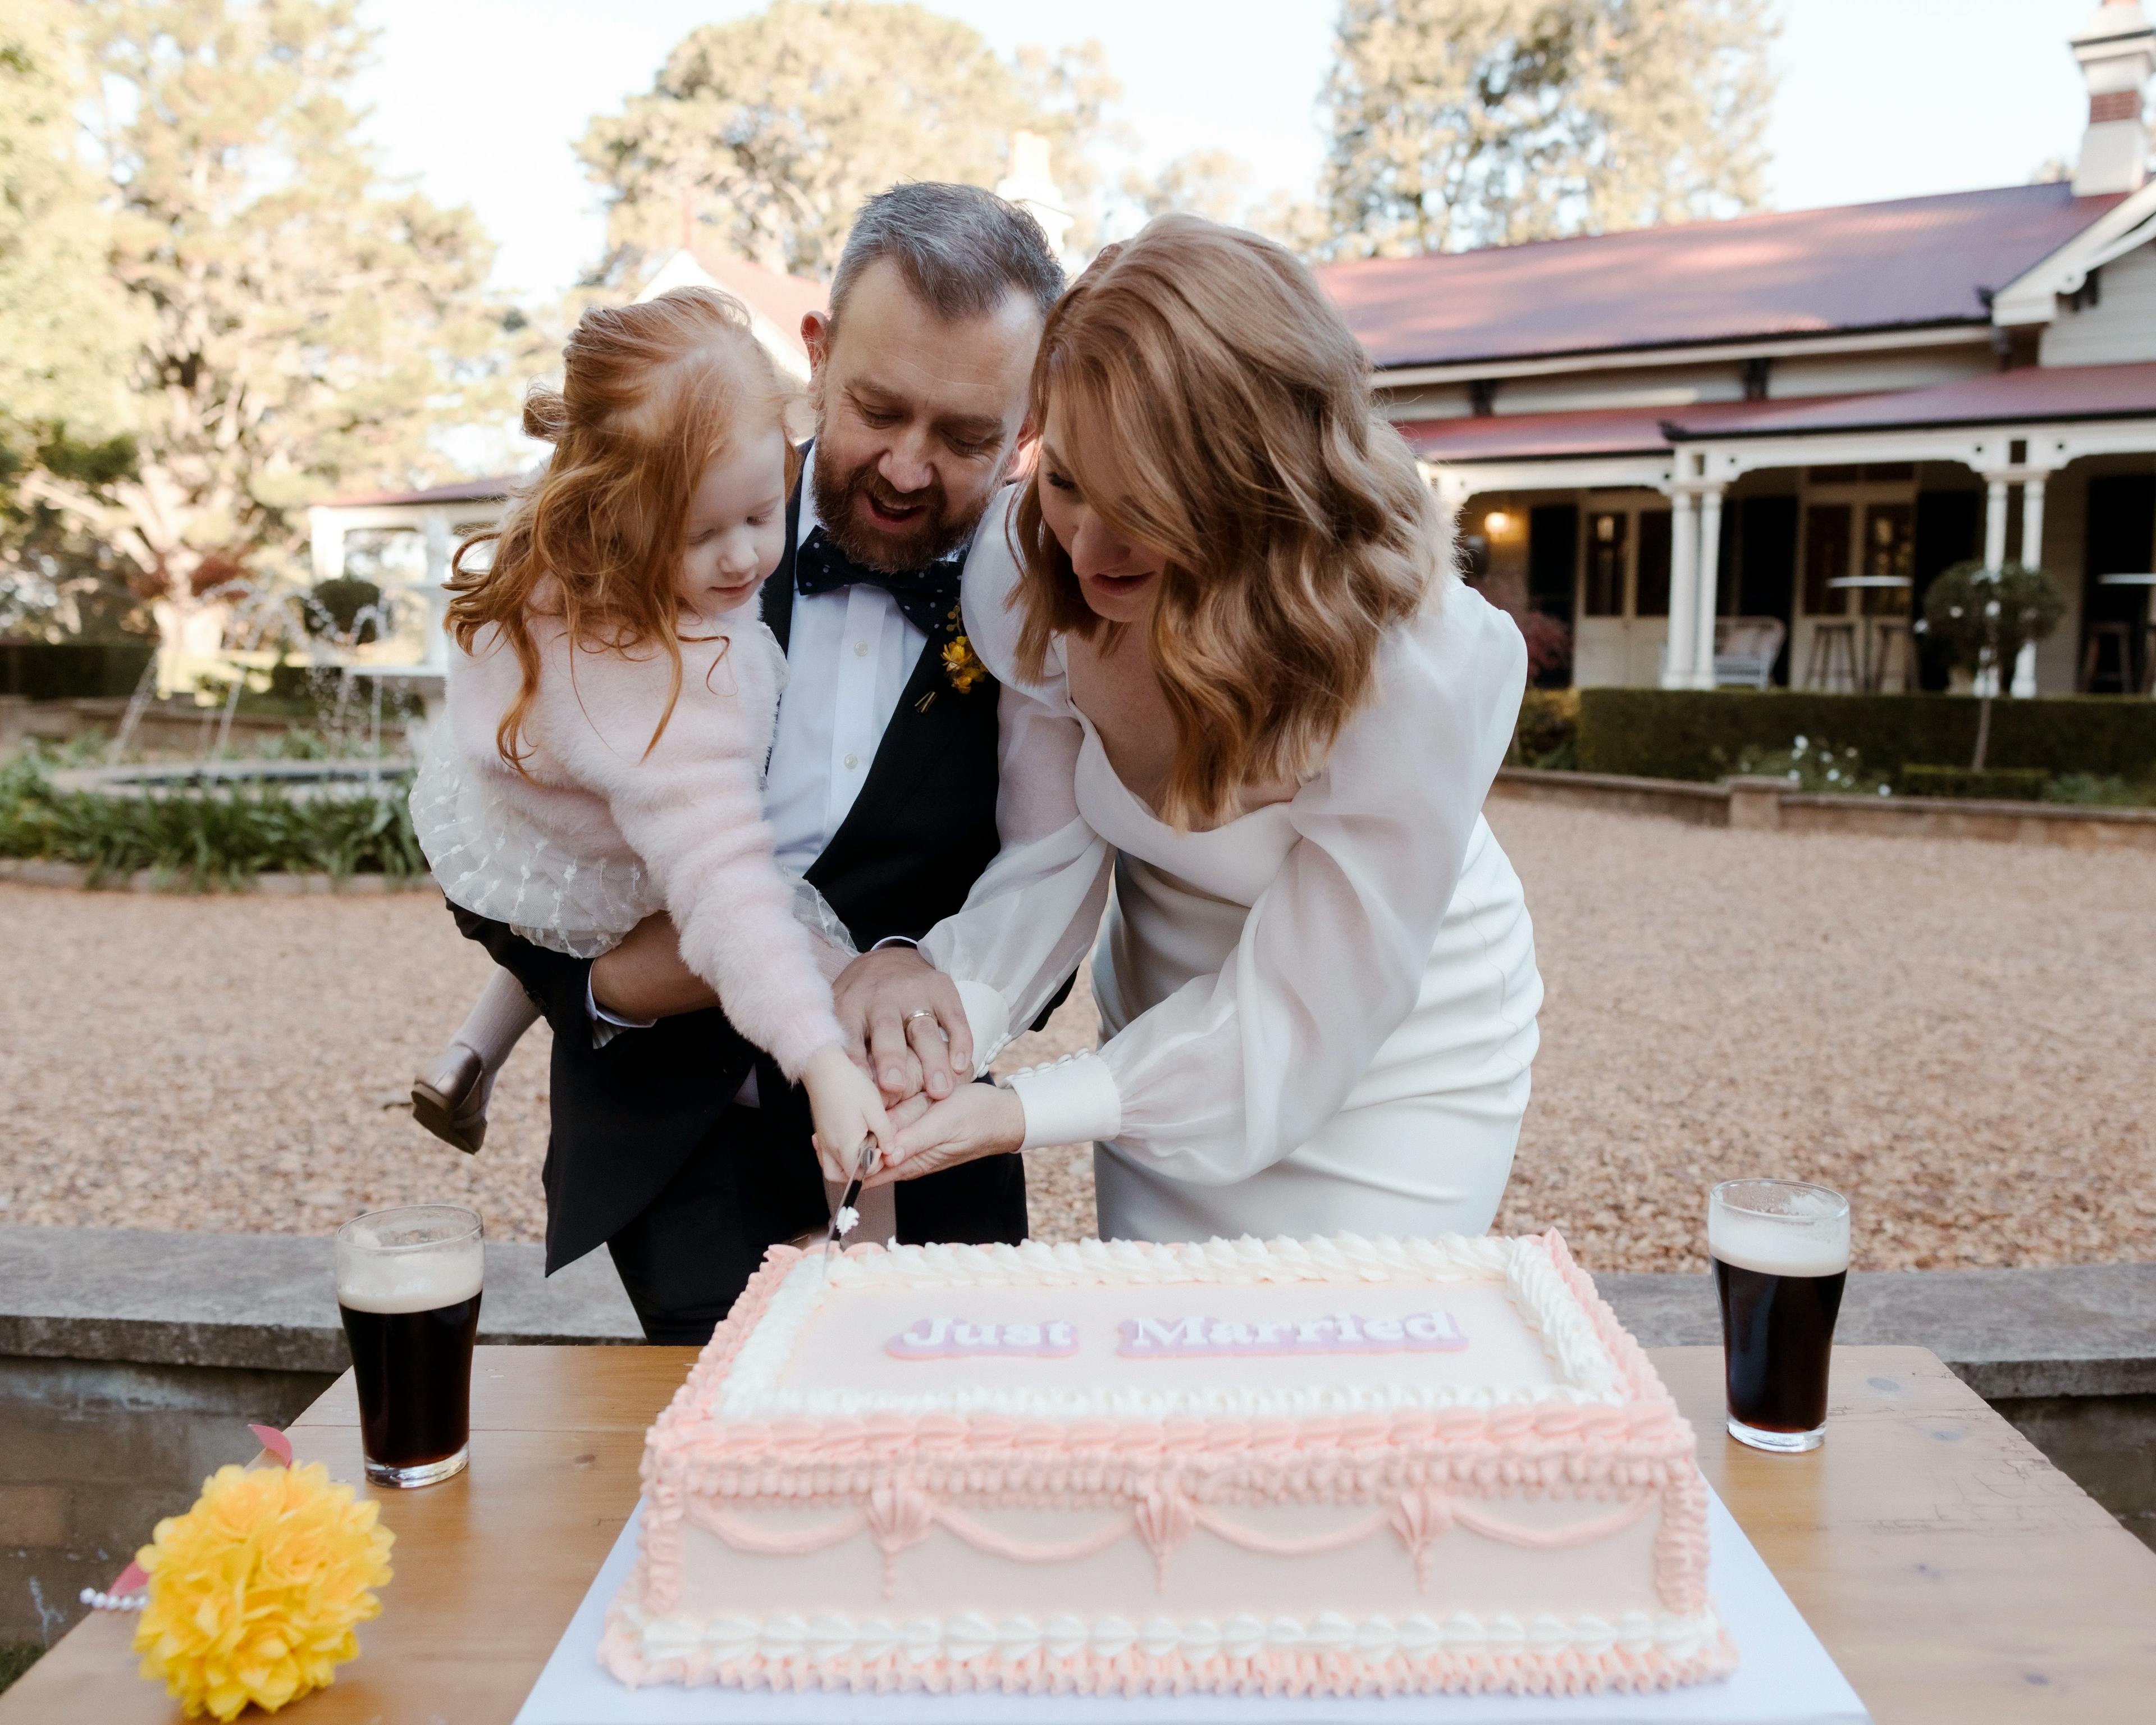 Bride, groom and daughter cutting cake